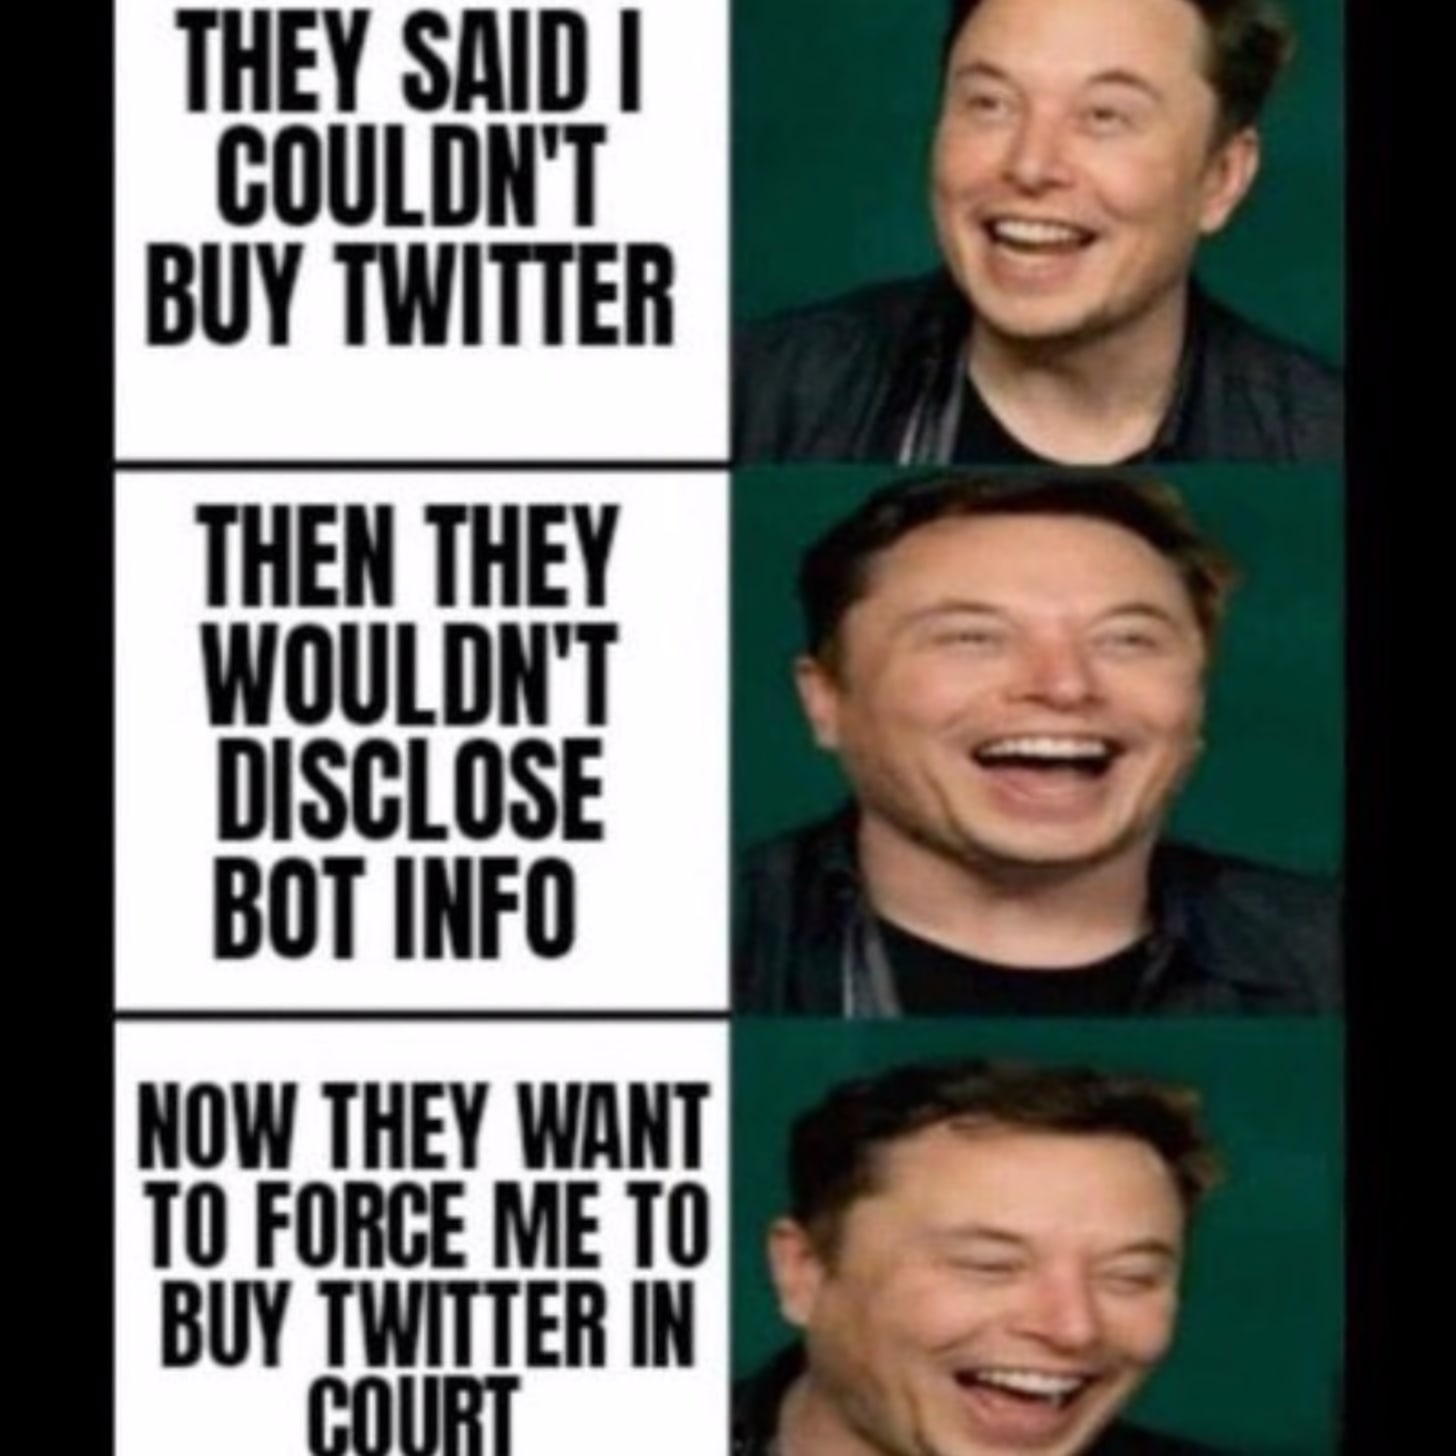 Elon Musk Responds to Twitter's Lawsuit Threat With a Meme of Elon Musk